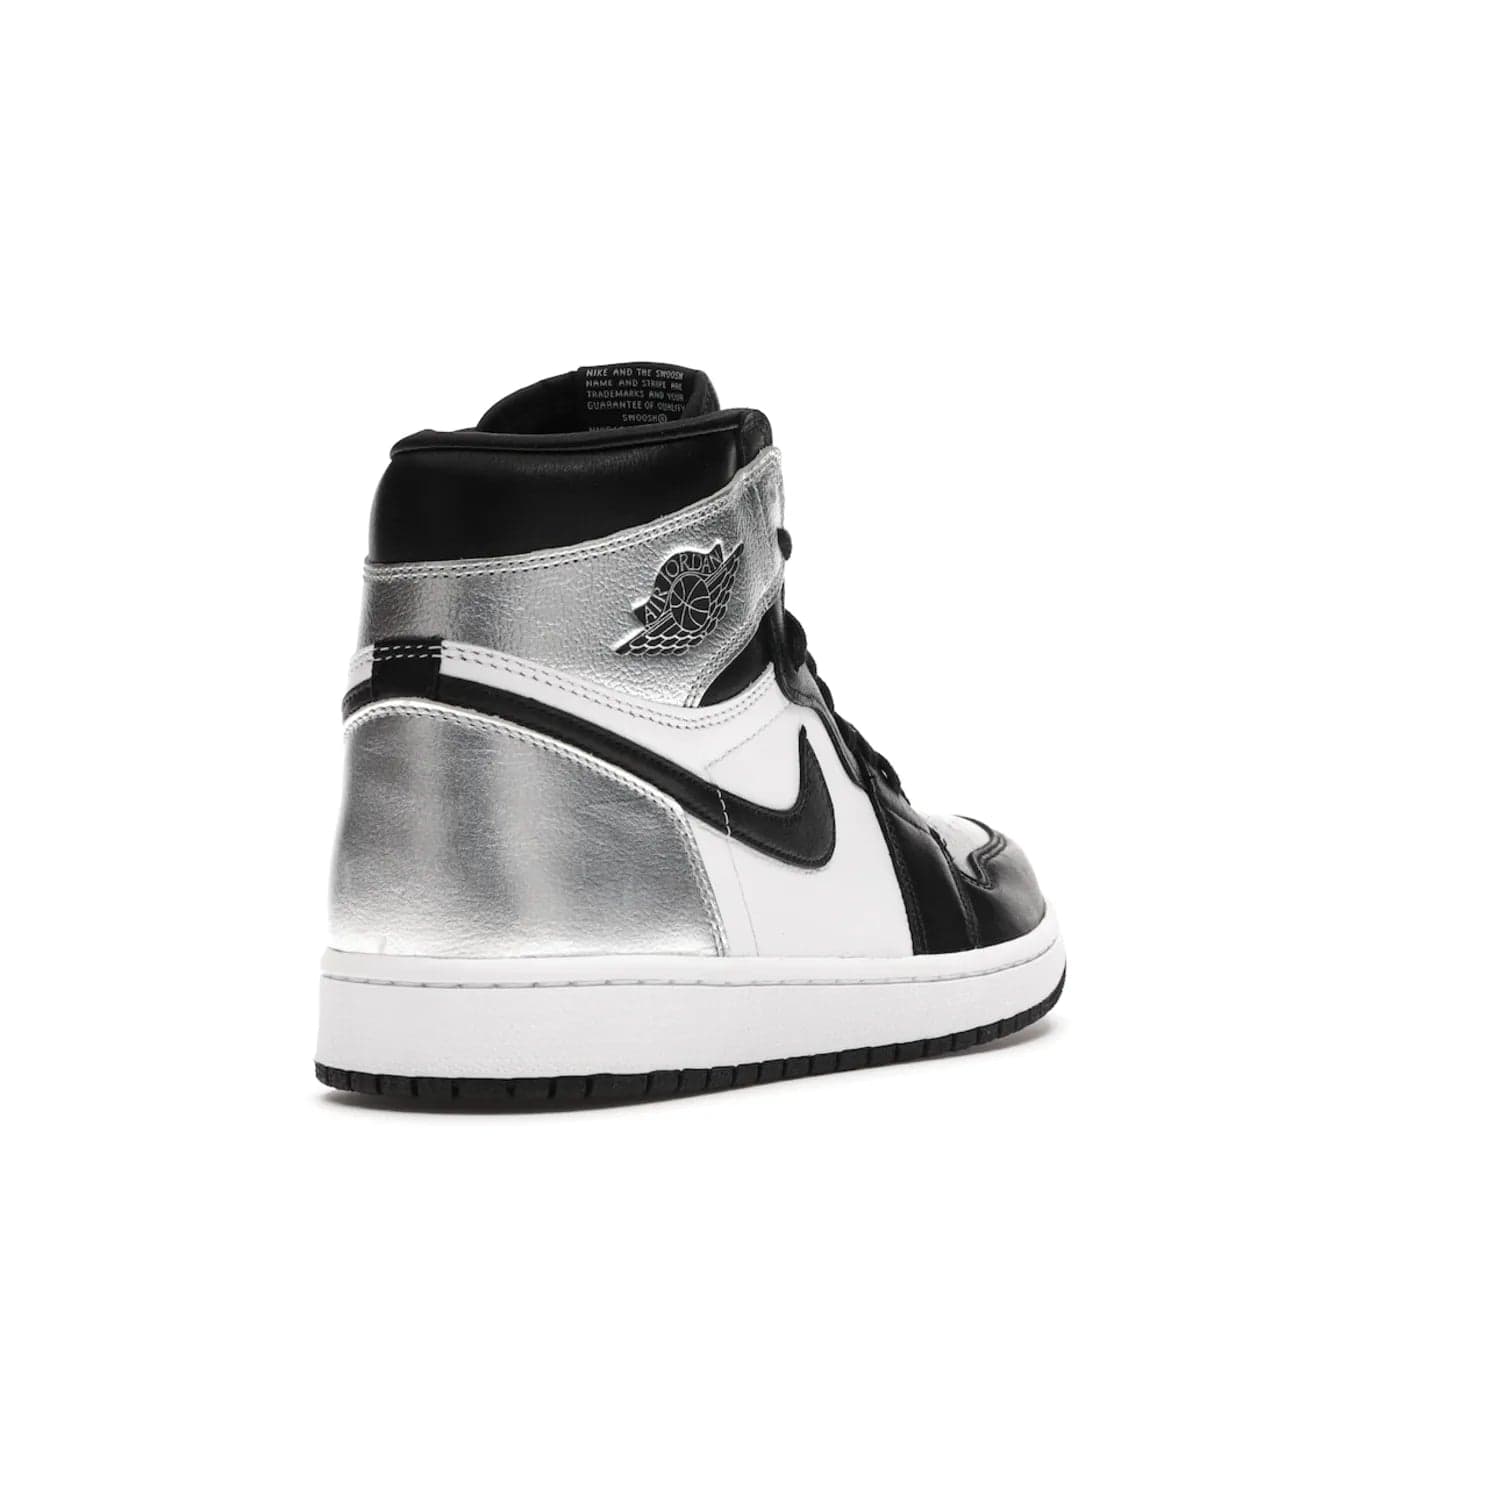 Jordan 1 Retro High Silver Toe (Women's) - Image 31 - Only at www.BallersClubKickz.com - Introducing the Jordan 1 Retro High Silver Toe (Women's): an updated spin on the iconic 'Black Toe' theme. Featuring white & black leather and silver patent leather construction. Nike Air branding, Air Jordan Wings logo, and white/black sole finish give a classic look. The perfect addition to an on-trend streetwear look. Available in classic black & white, this Jordan 1 is an instant classic. Released in February 20